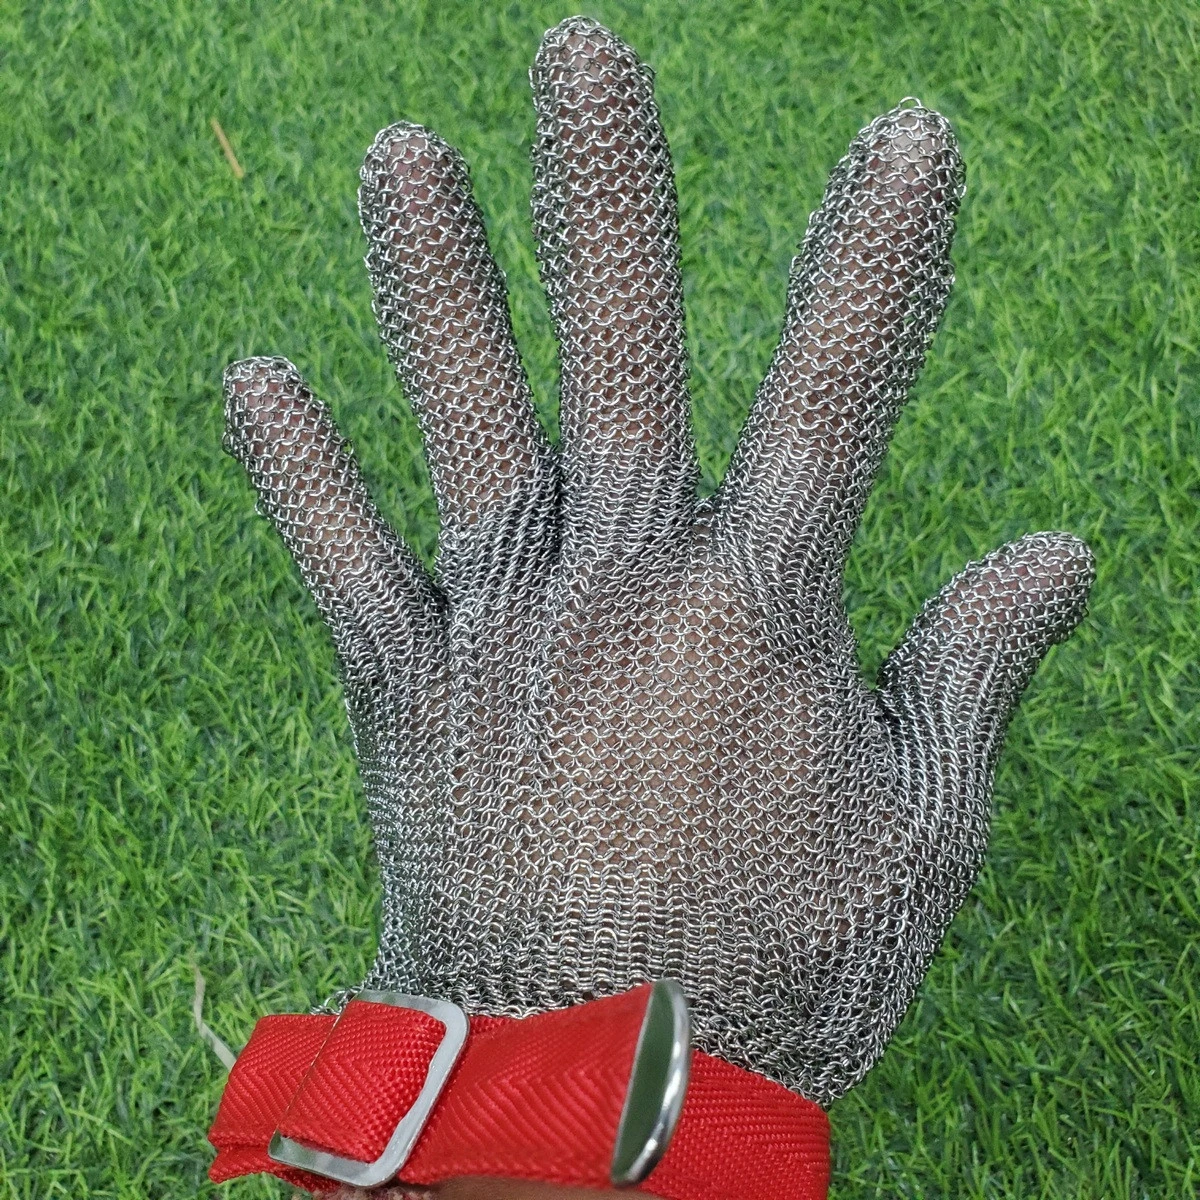 304 Stainless Steel Mitten Butcher Used Five Fingers Anti-cutting Stainless Steel Mesh Chain Mail Mitten